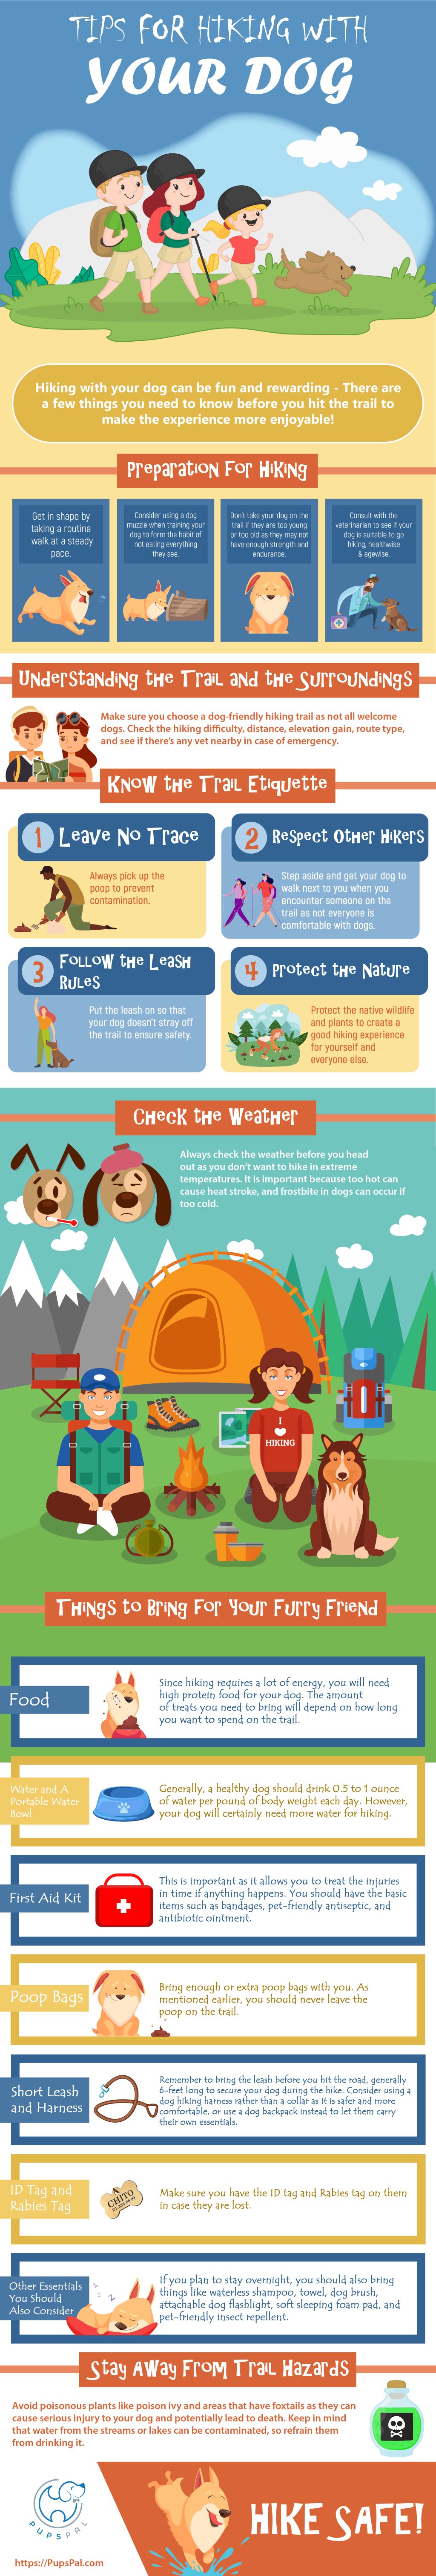 Tips For Hiking With Your Dog by PupsPal.com